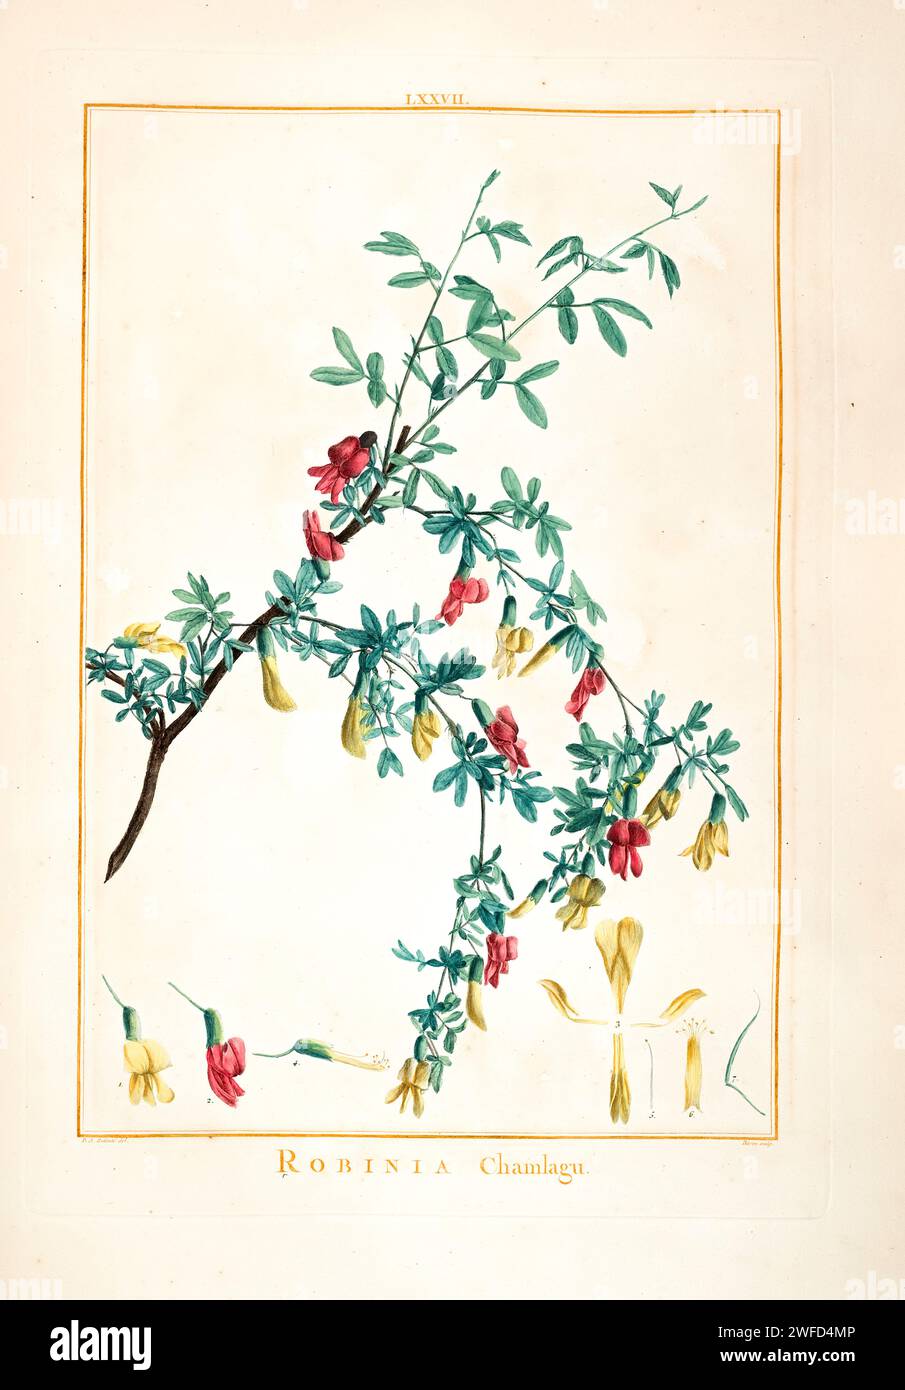 Robinia chamlagu syn Caragana sinica Hand Painted by Pierre-Joseph Redouté and published in Stirpes Novae aut Minus Cognitae (1784) by Charles Louis L'Héritier de Brutelle. Caragana sinica is a species belonging to the genus Caragana. Caragana sinica is known to produce the stilbenoid trimers α-viniferin, showing acetylcholinesterase inhibitory activity, and miyabenol C, a protein kinase C inhibitor and two stilbene tetramers kobophenol A, and carasinol B. Stock Photo